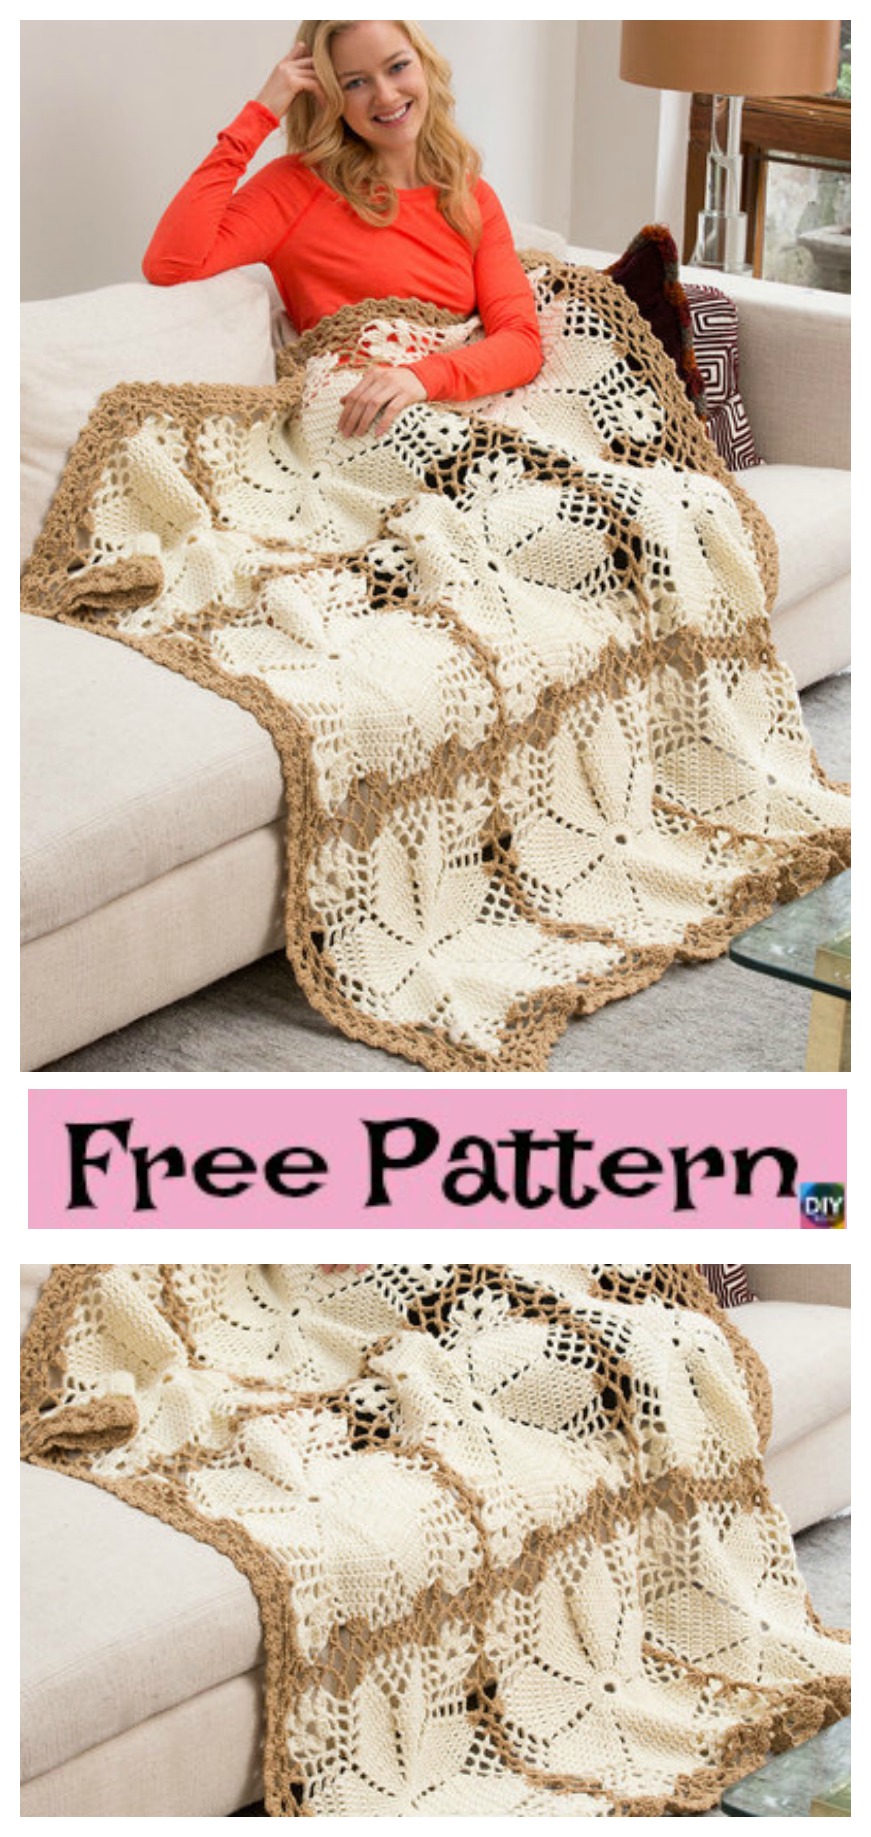 diy4ever-Crochet Lacy Floral Throw - Free Pattern